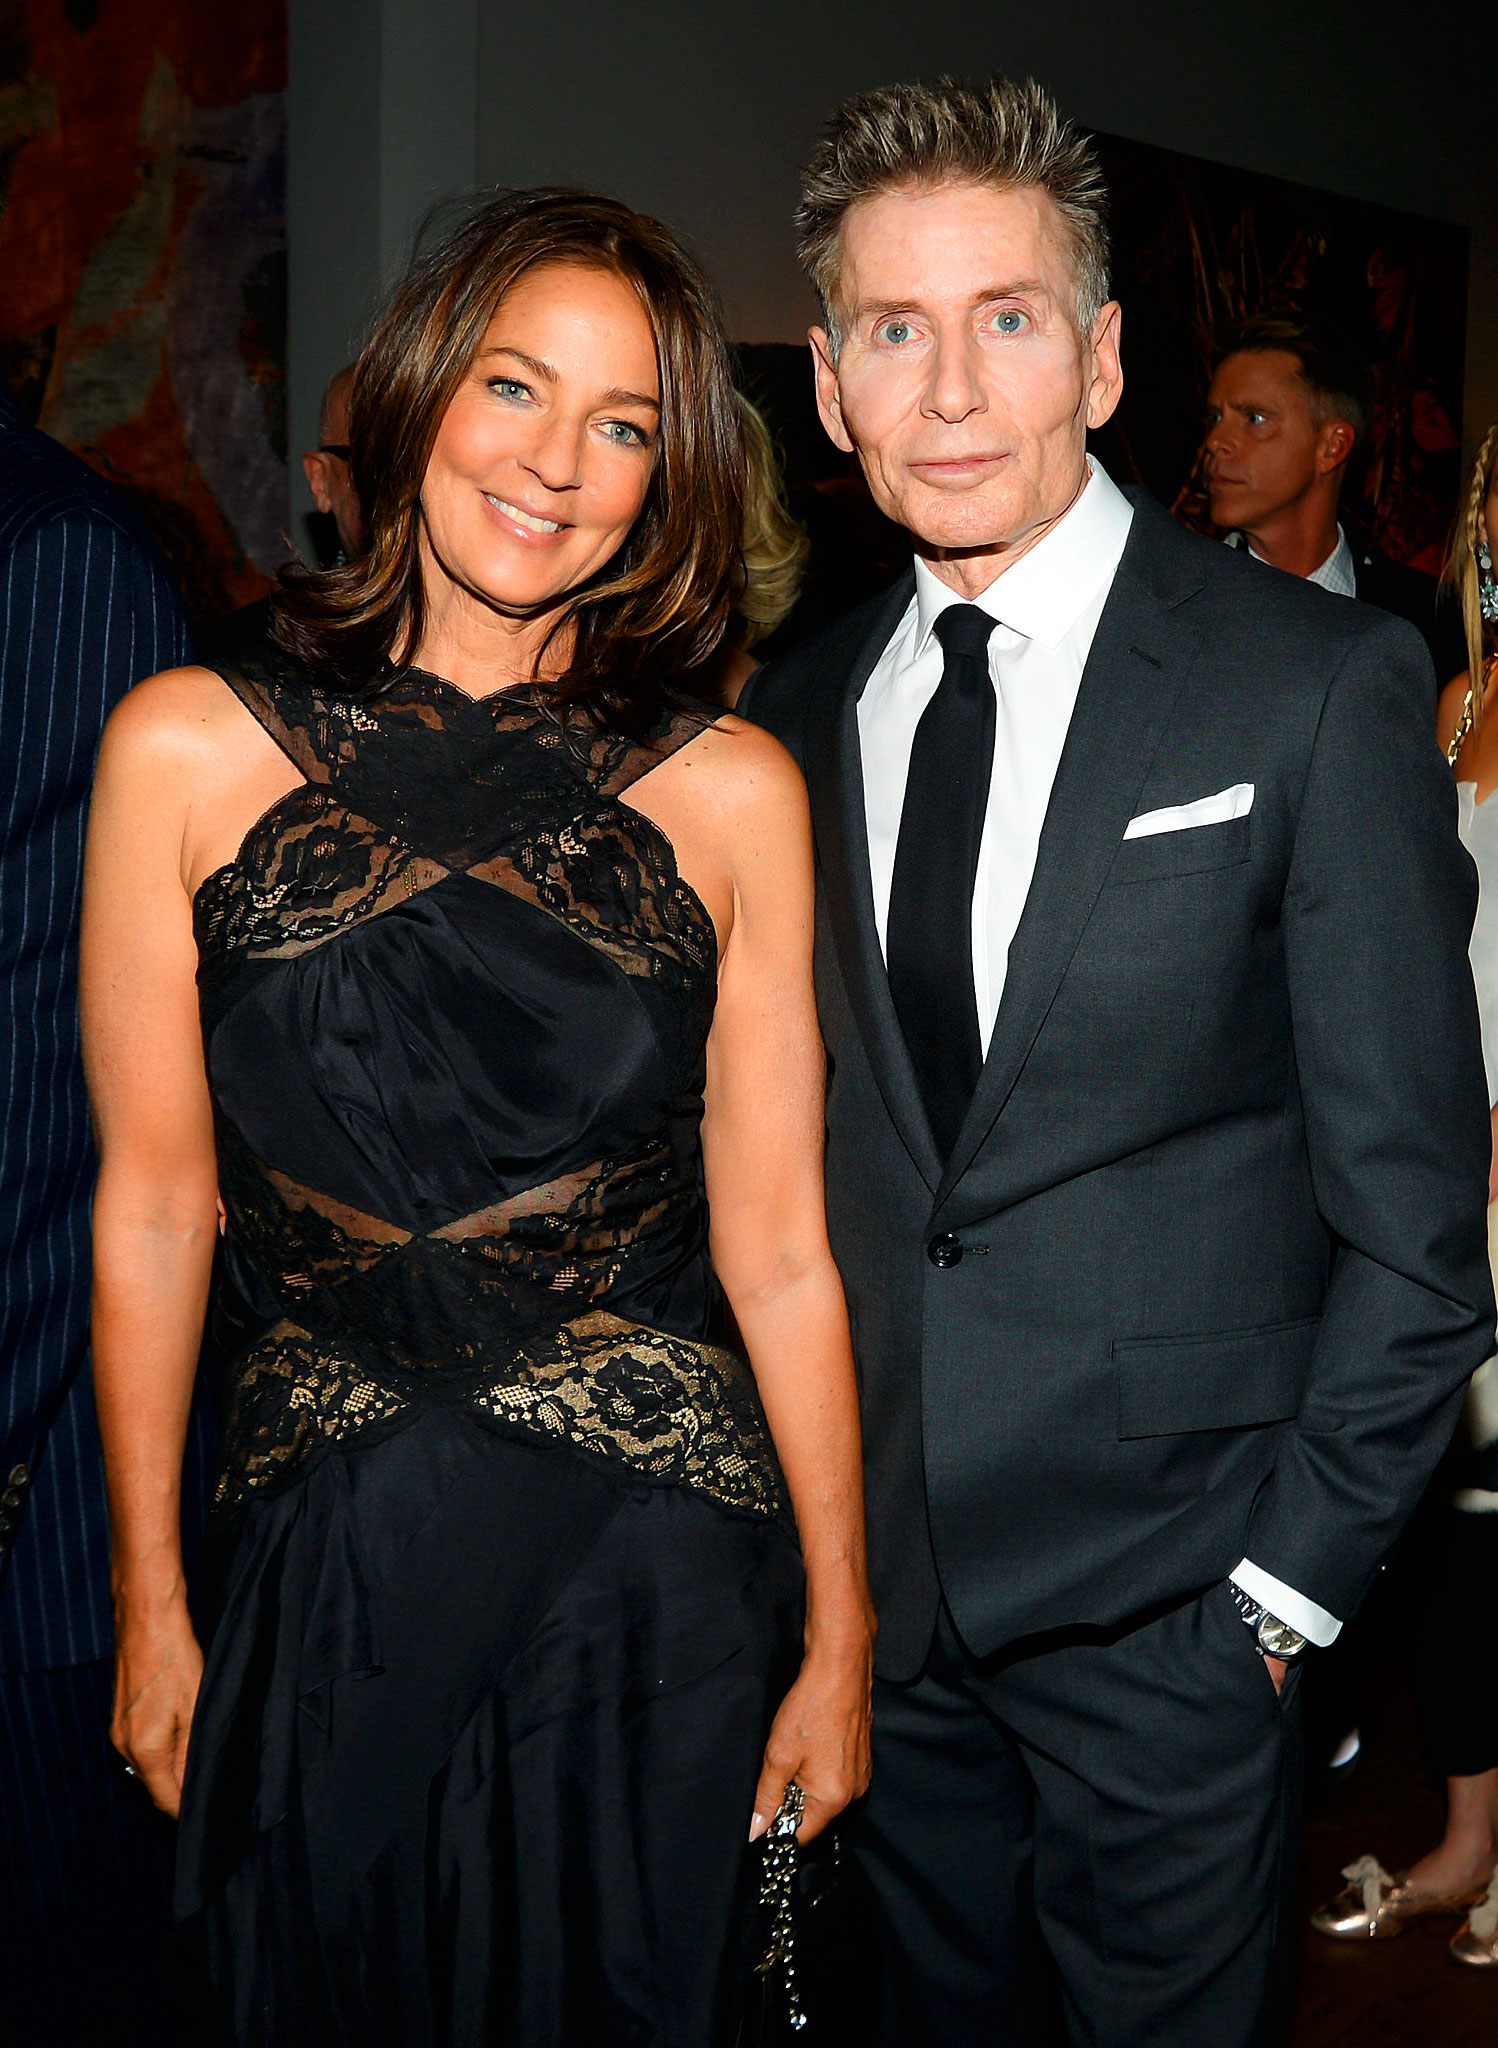 Calvin Klein with his second wife Kelly Rector at Met Gala, 2015